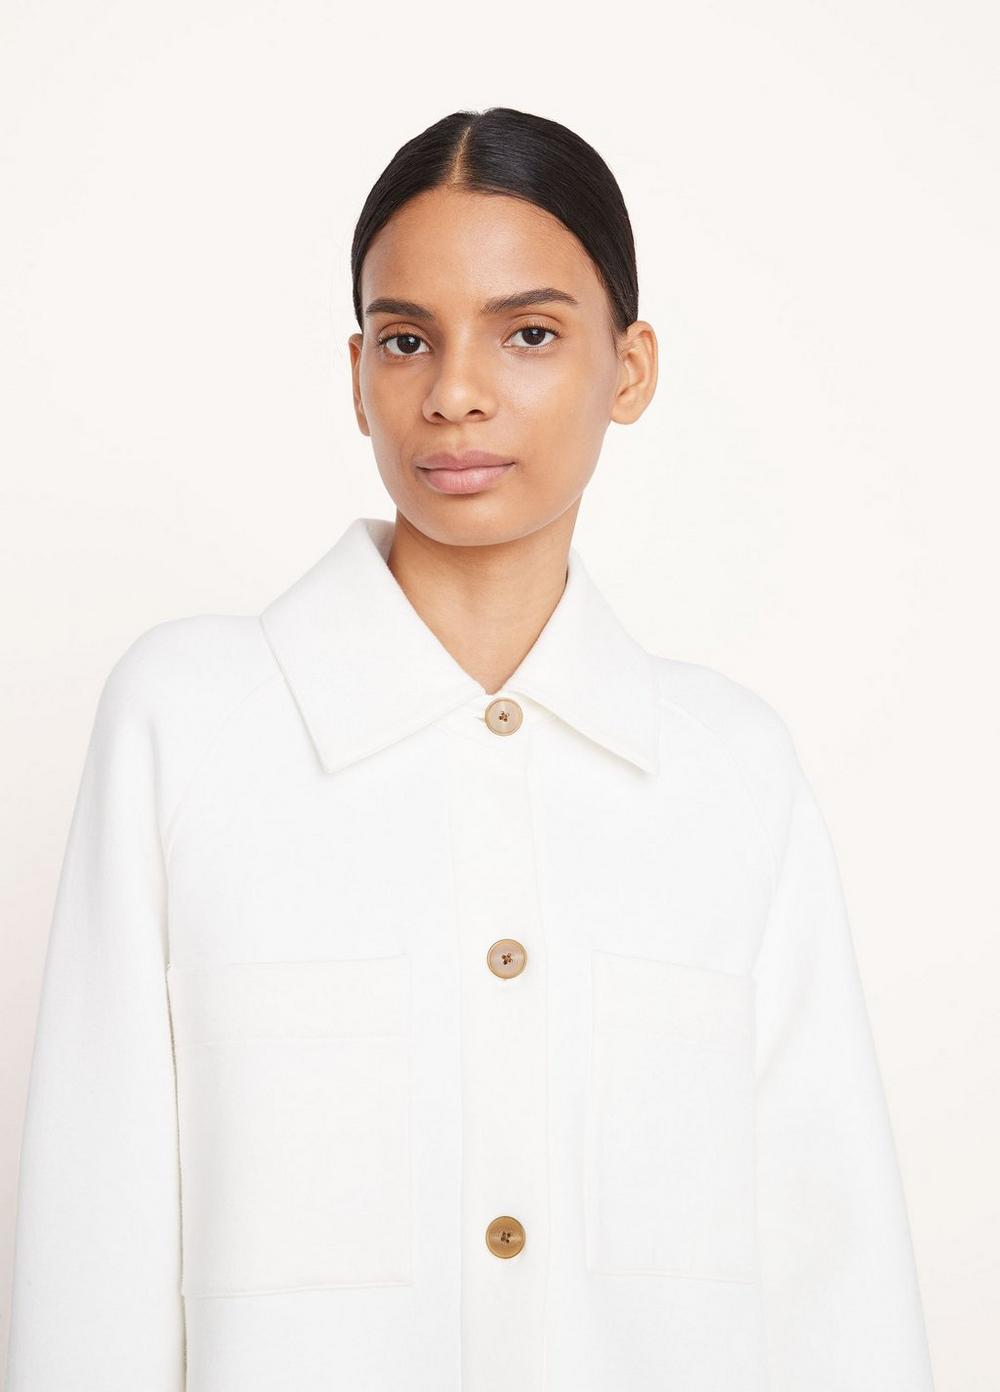 Vince | Shirt Jacket in Optic White | Vince Unfold